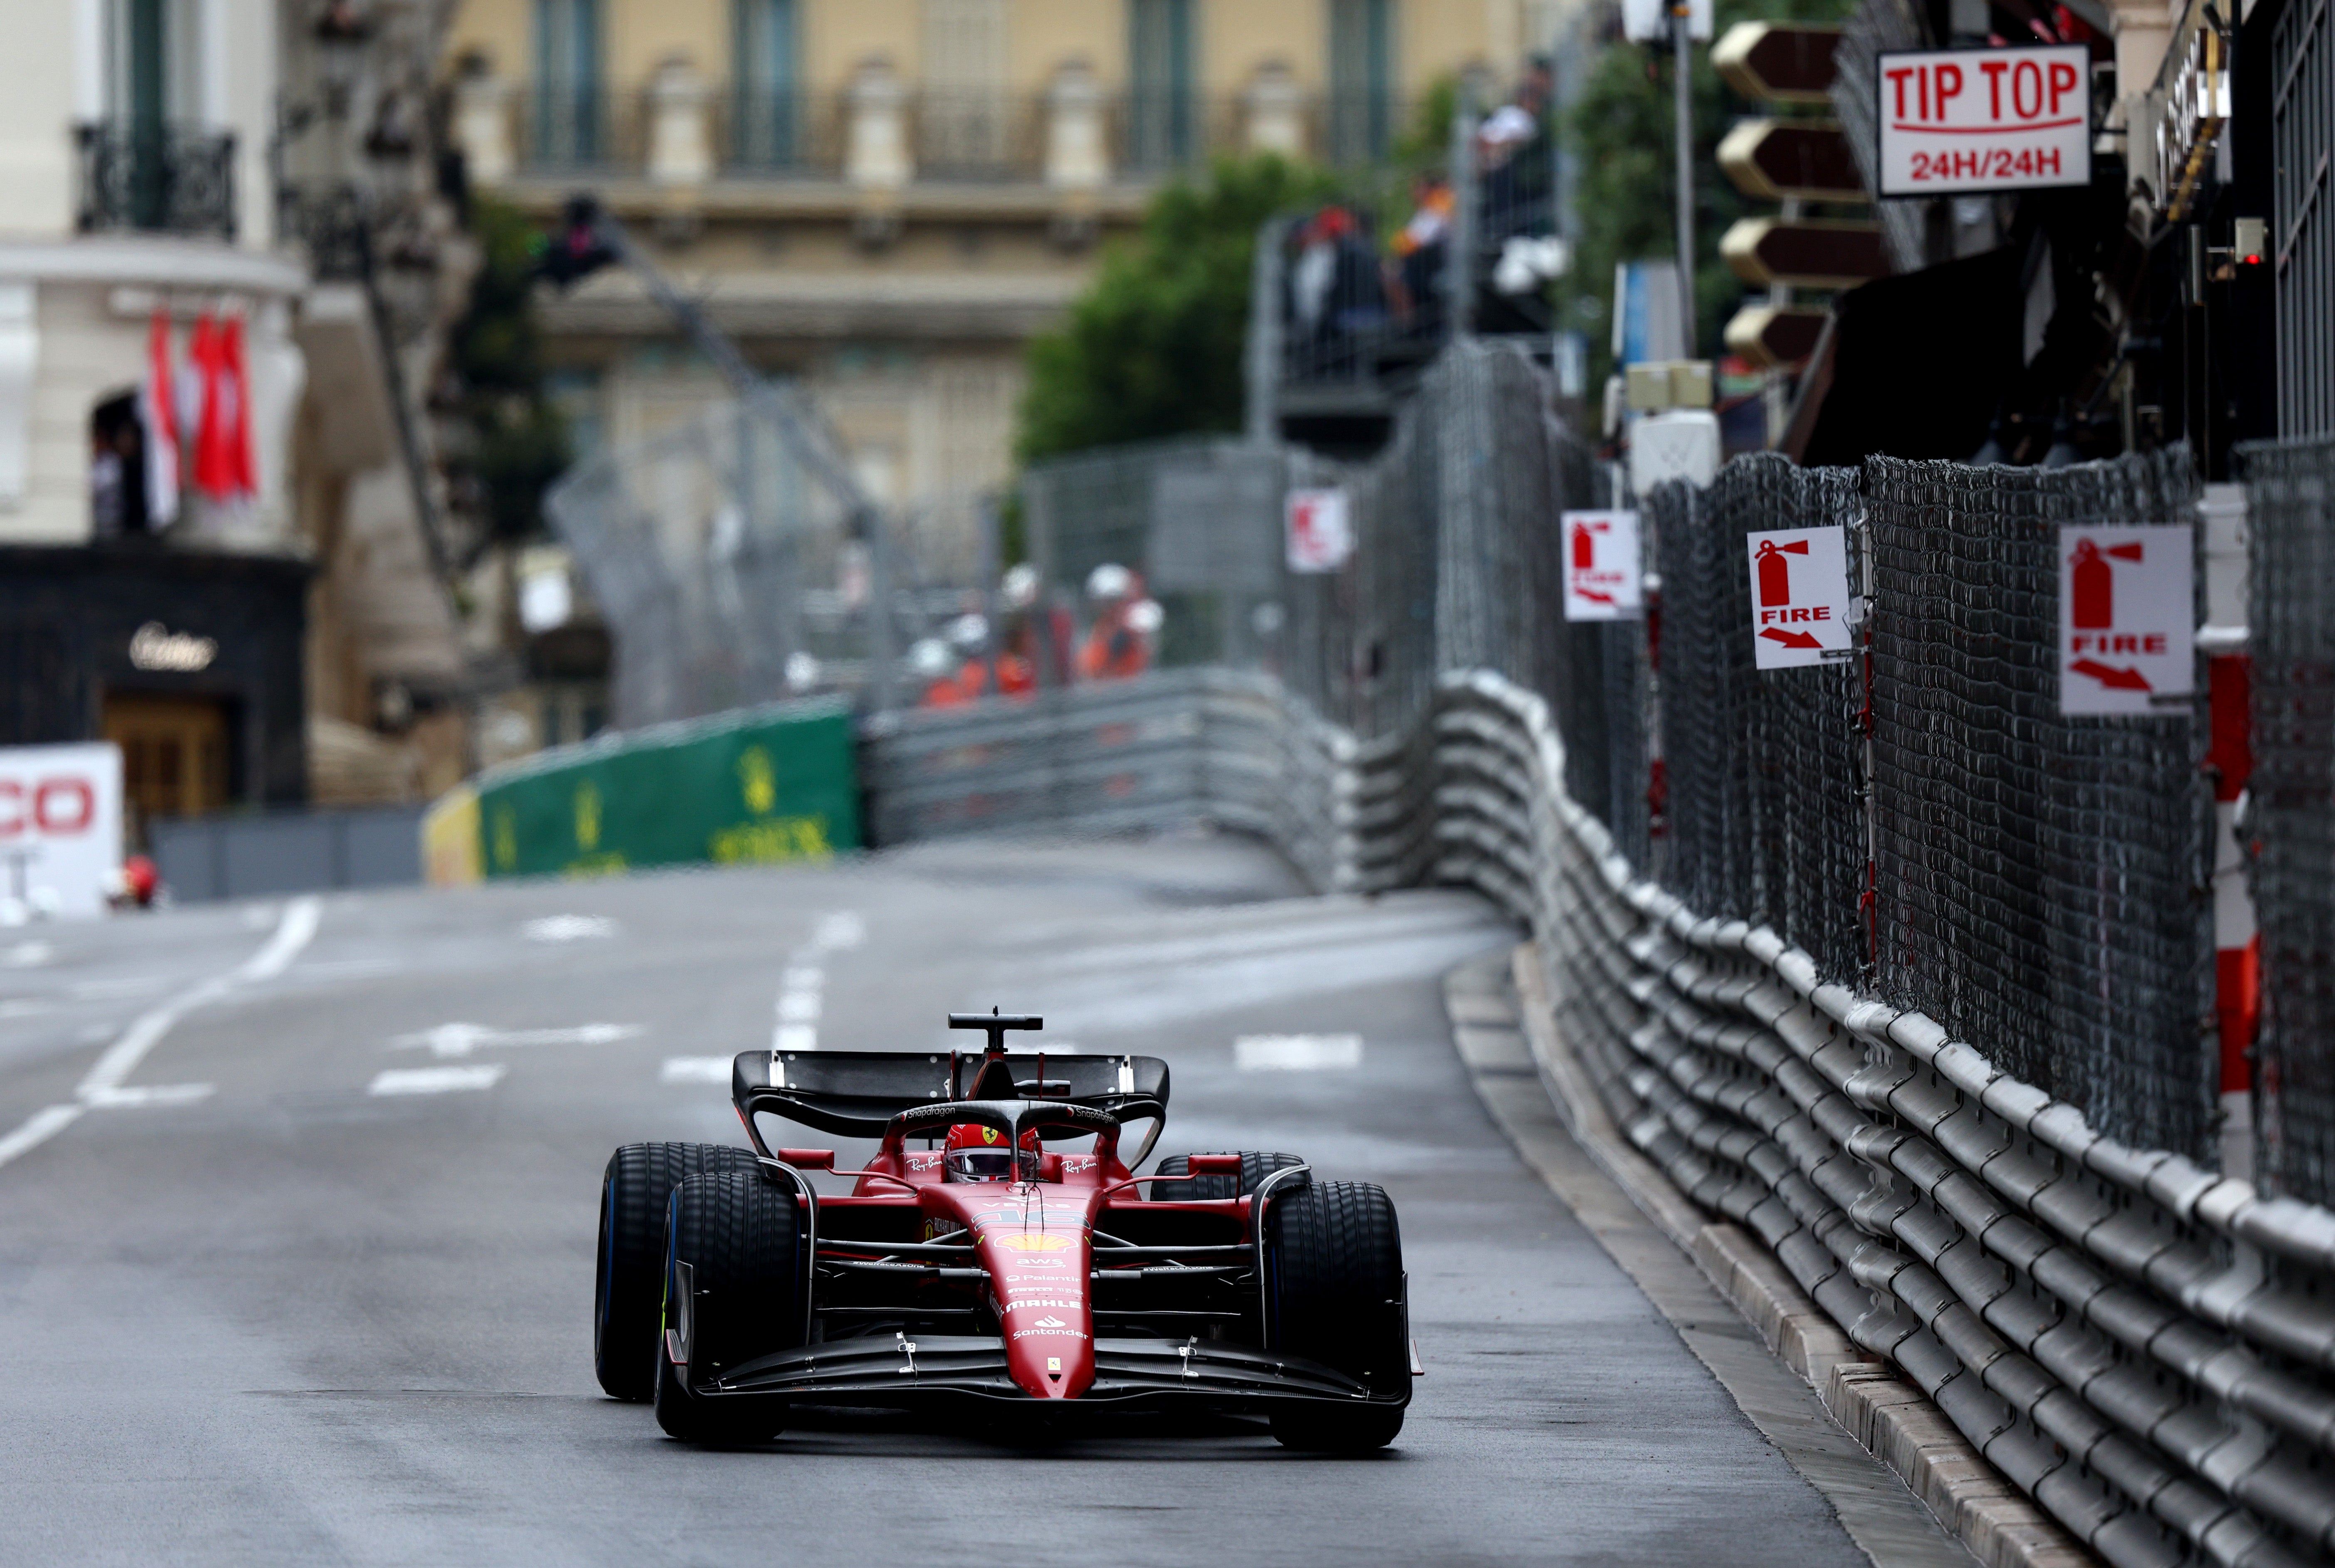 Charles Leclerc had pole in Monaco but finished fourth